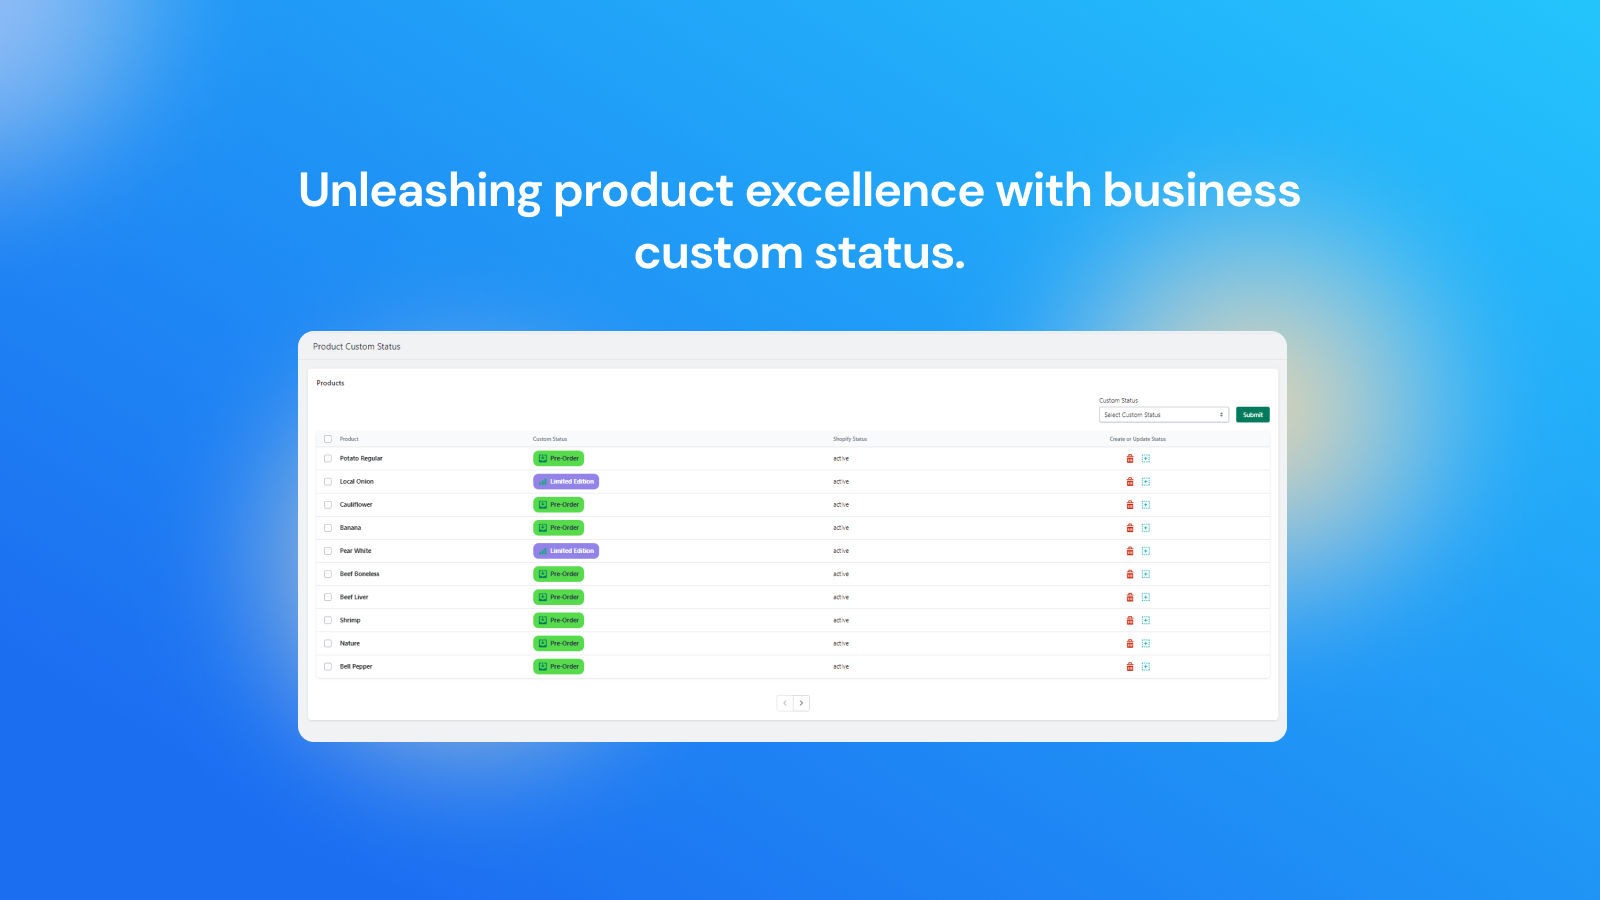 Unleashing product excellence with business custom status.